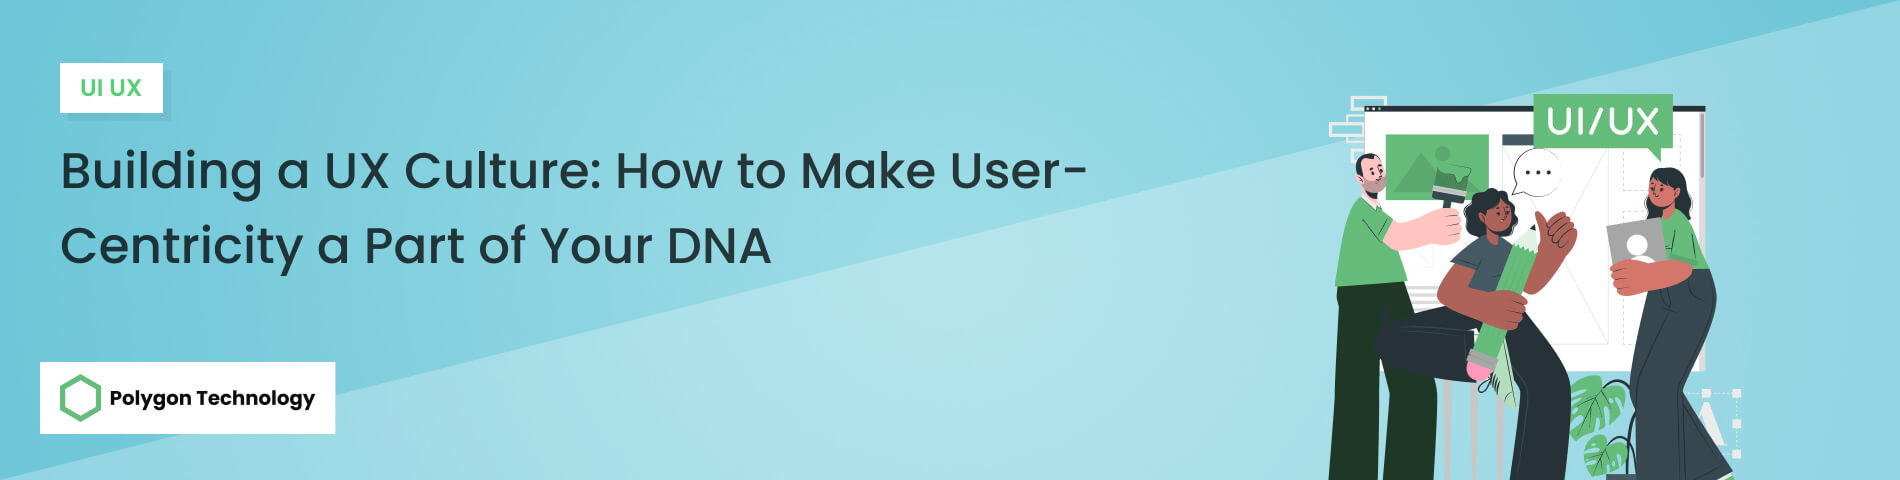 Building a UX Culture: How to Make User-Centricity a Part of Your DNA